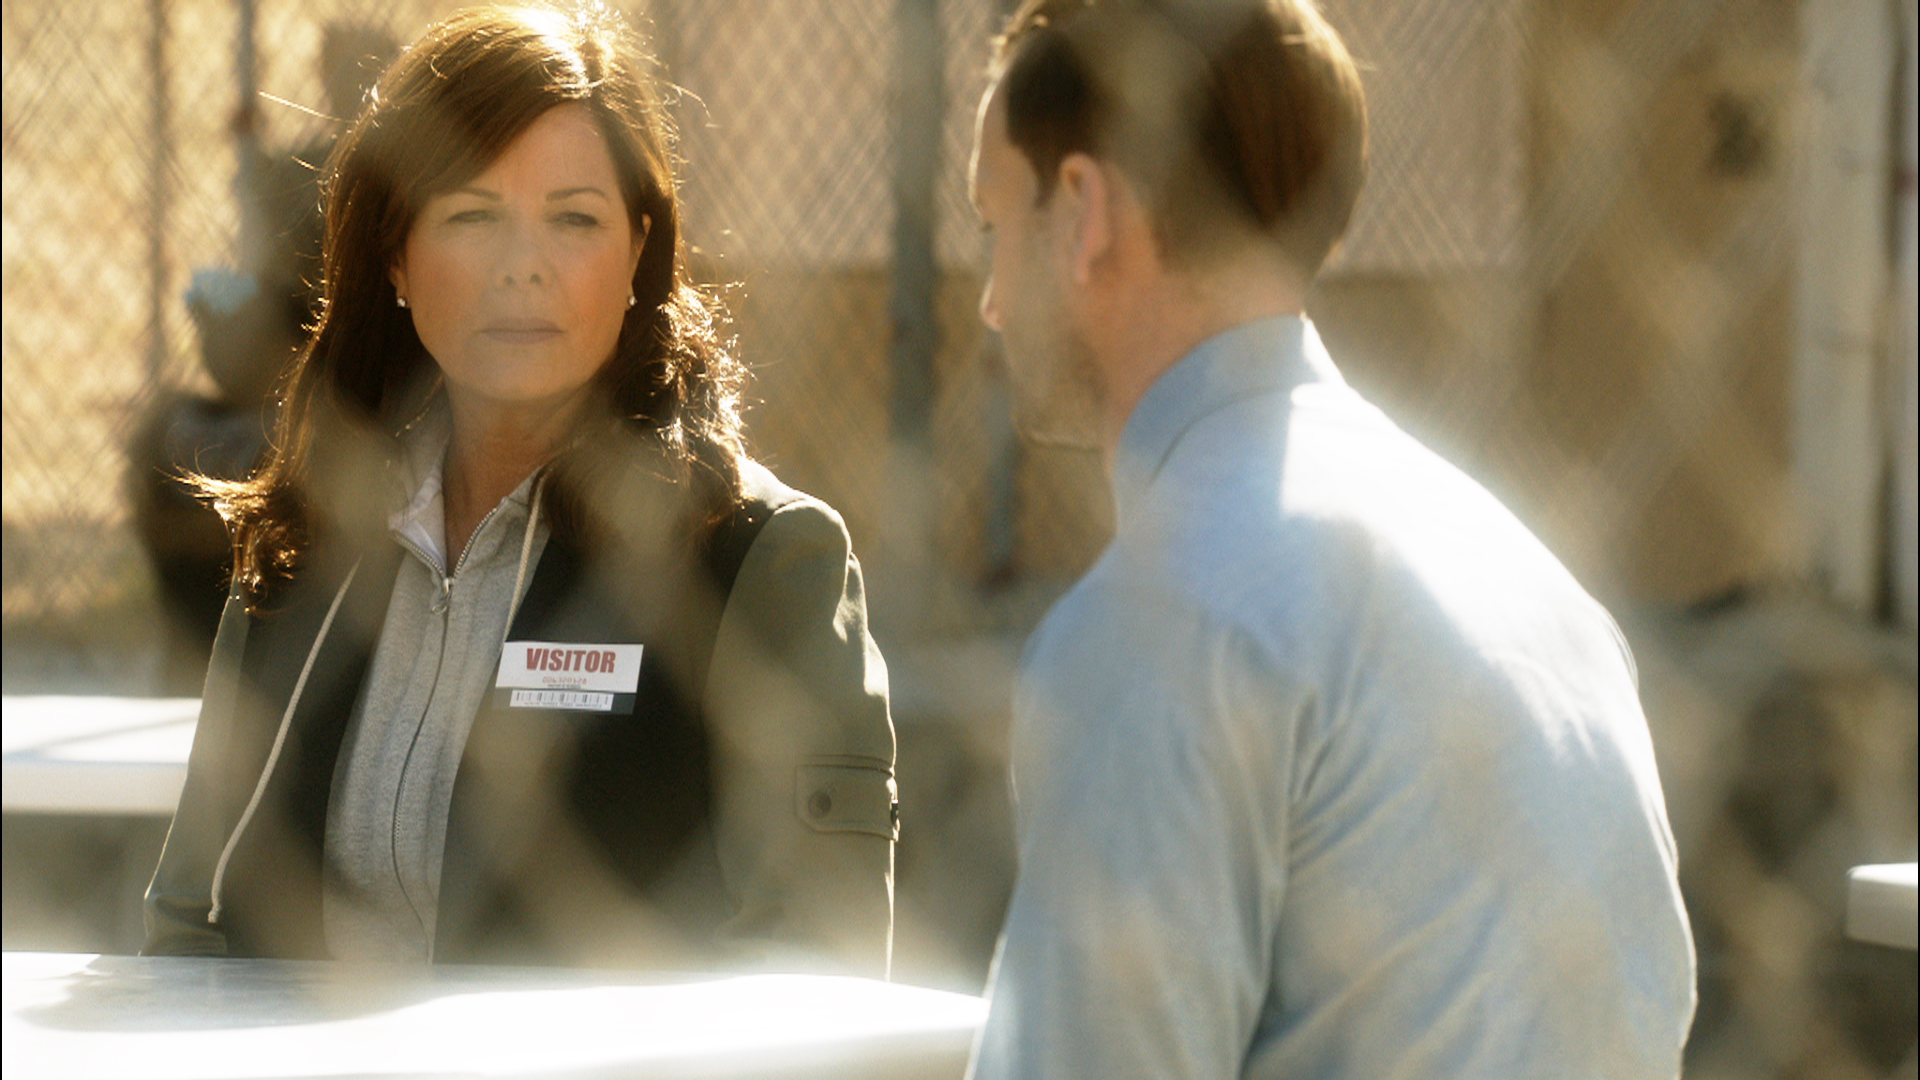 Dr. Leanne Rorish (Marcia Gay Harden) meets with the drunk driver who killed her family.